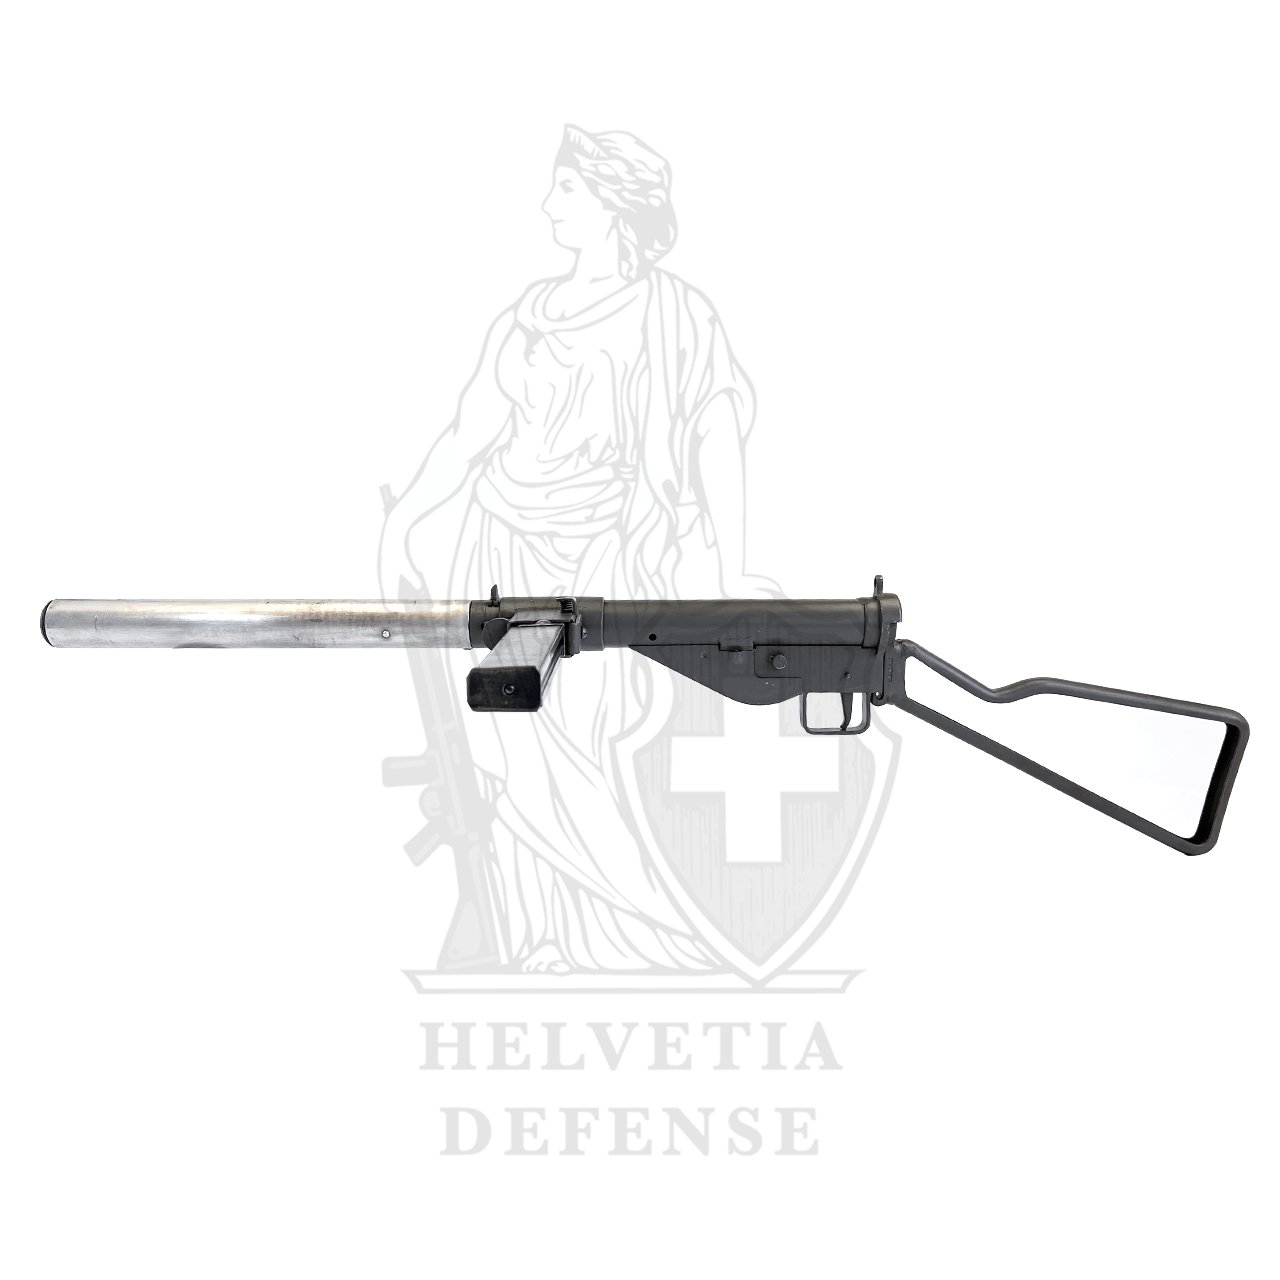 STEN MKII SD | His Royal Highness Victor Emmanuel of Savoy Collection